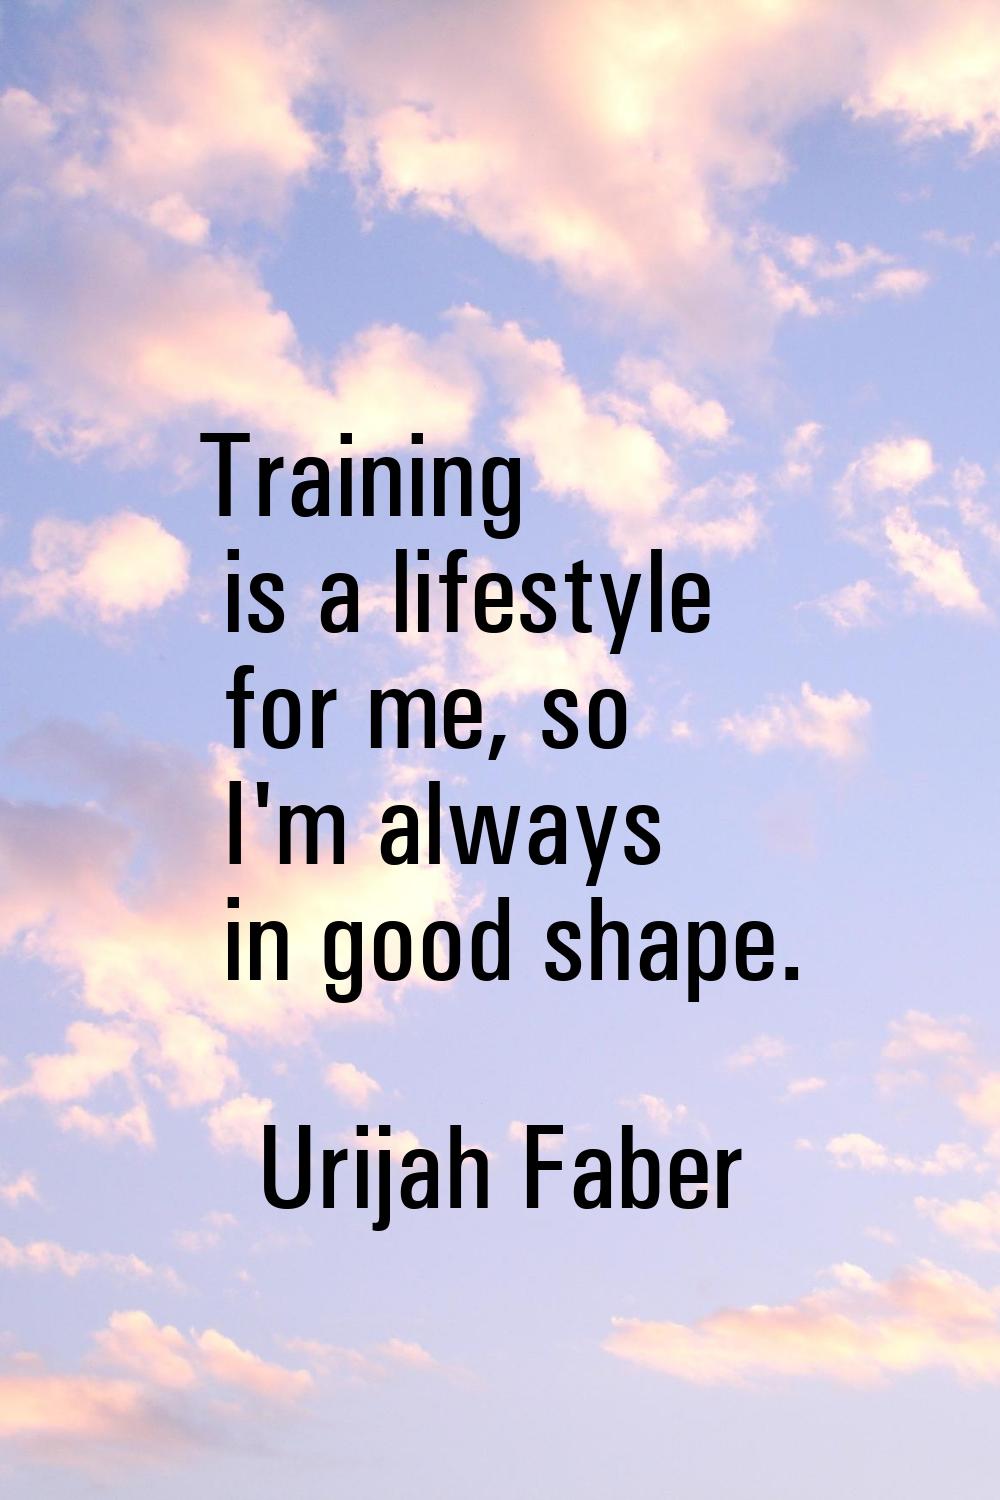 Training is a lifestyle for me, so I'm always in good shape.